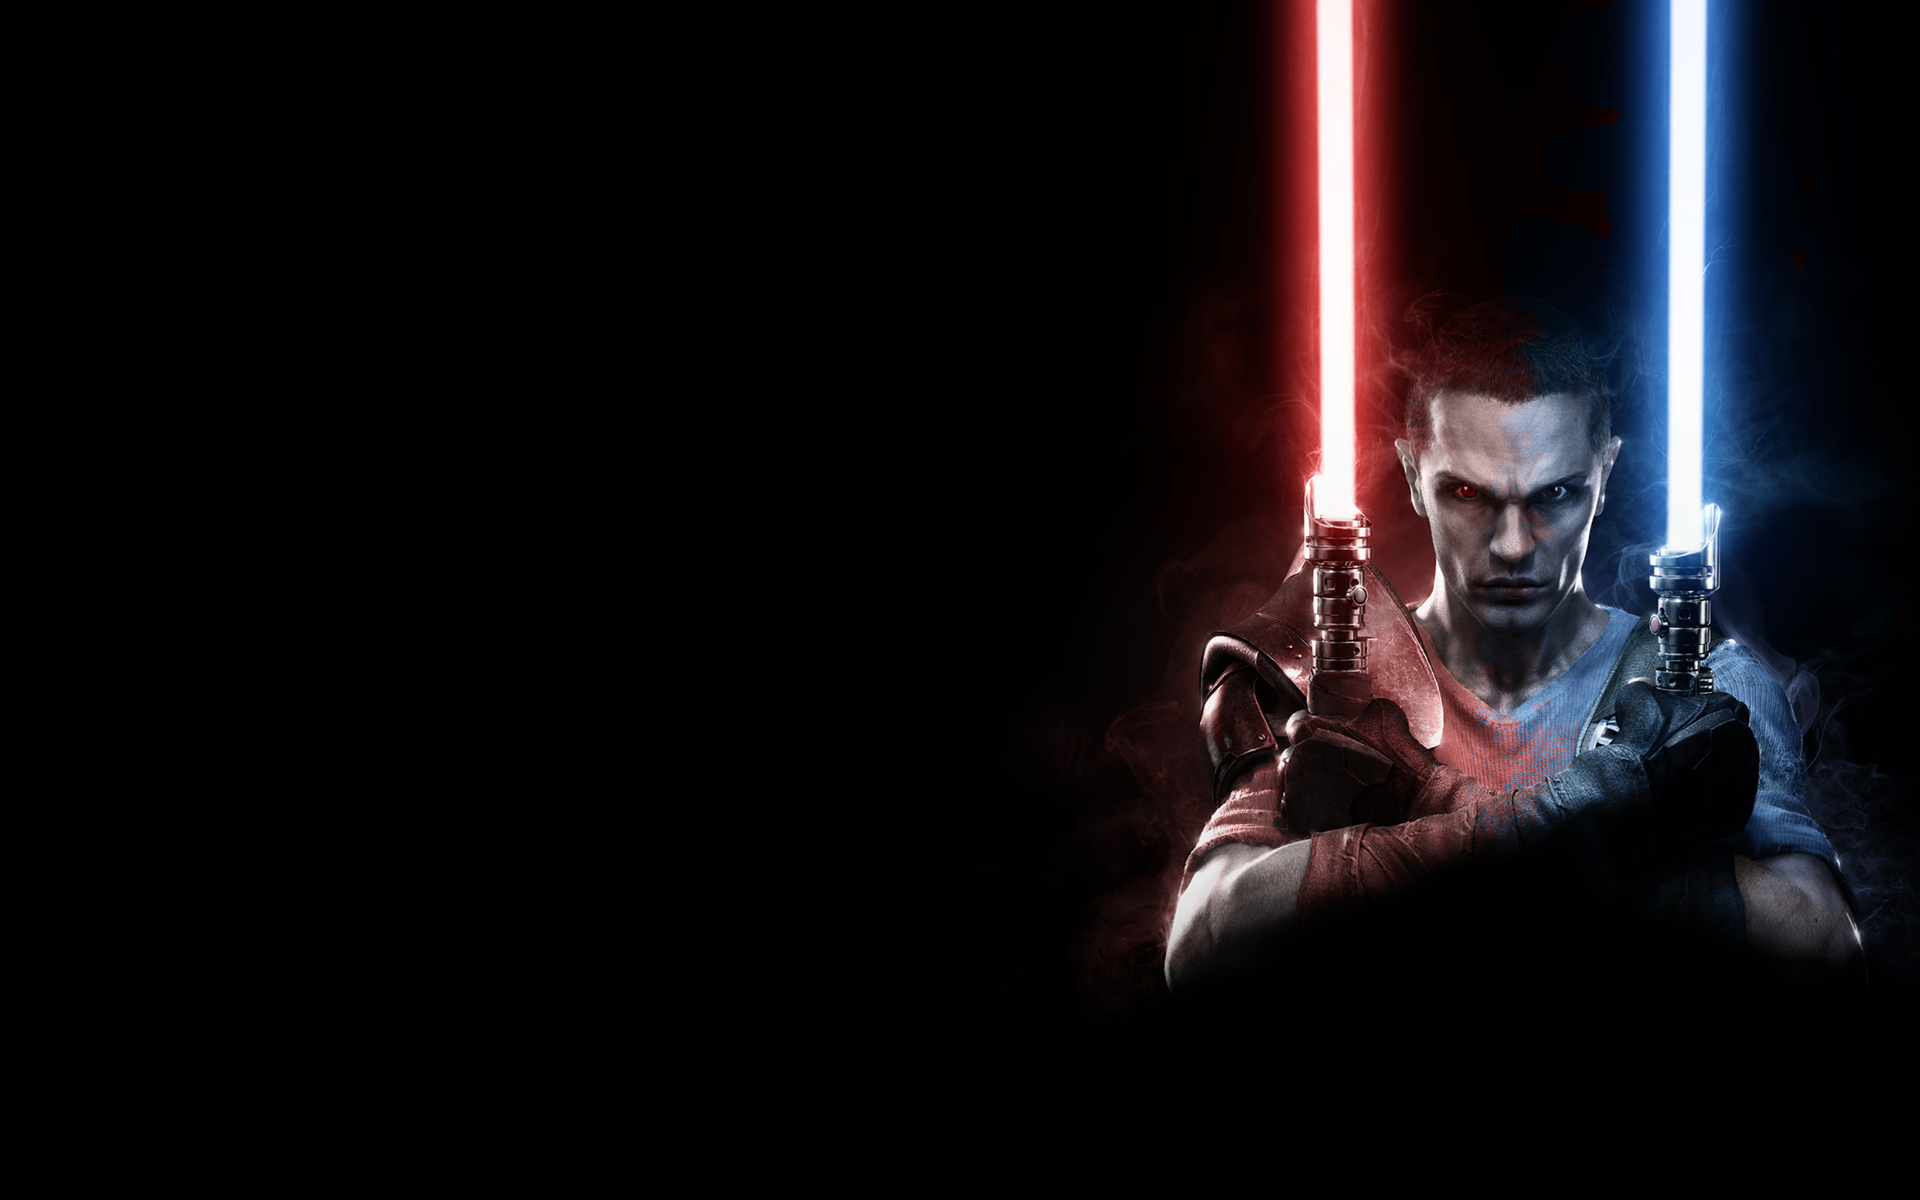 Download the Both Use The Force Wallpaper, Both Use The Force ...